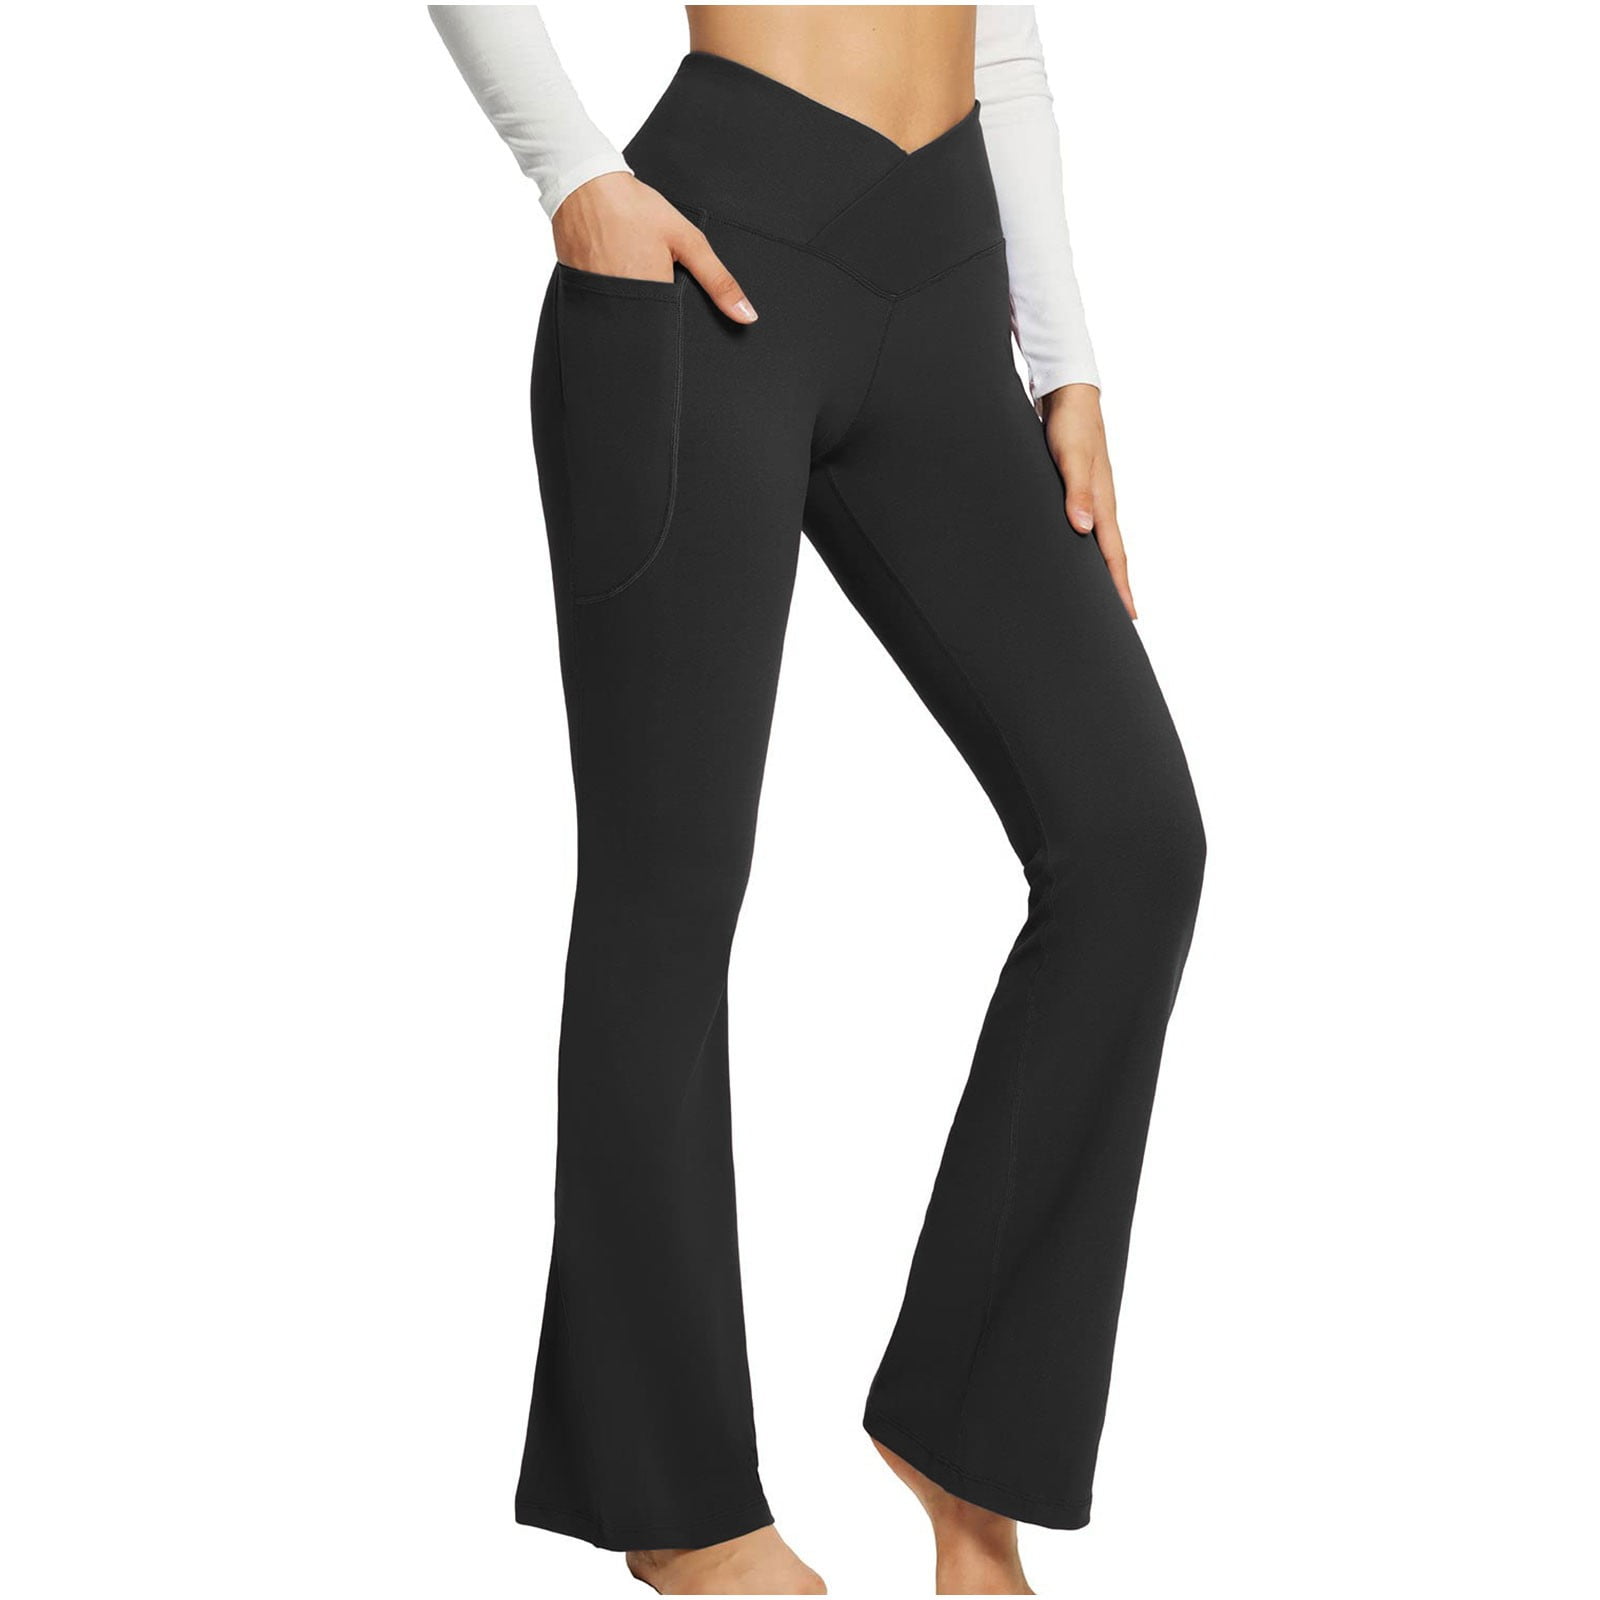 HEGALY Women's Flare Yoga Pants - Crossover Flare Leggings Buttery Soft  High Waisted Workout Casual Bootcut Pants Medium Black